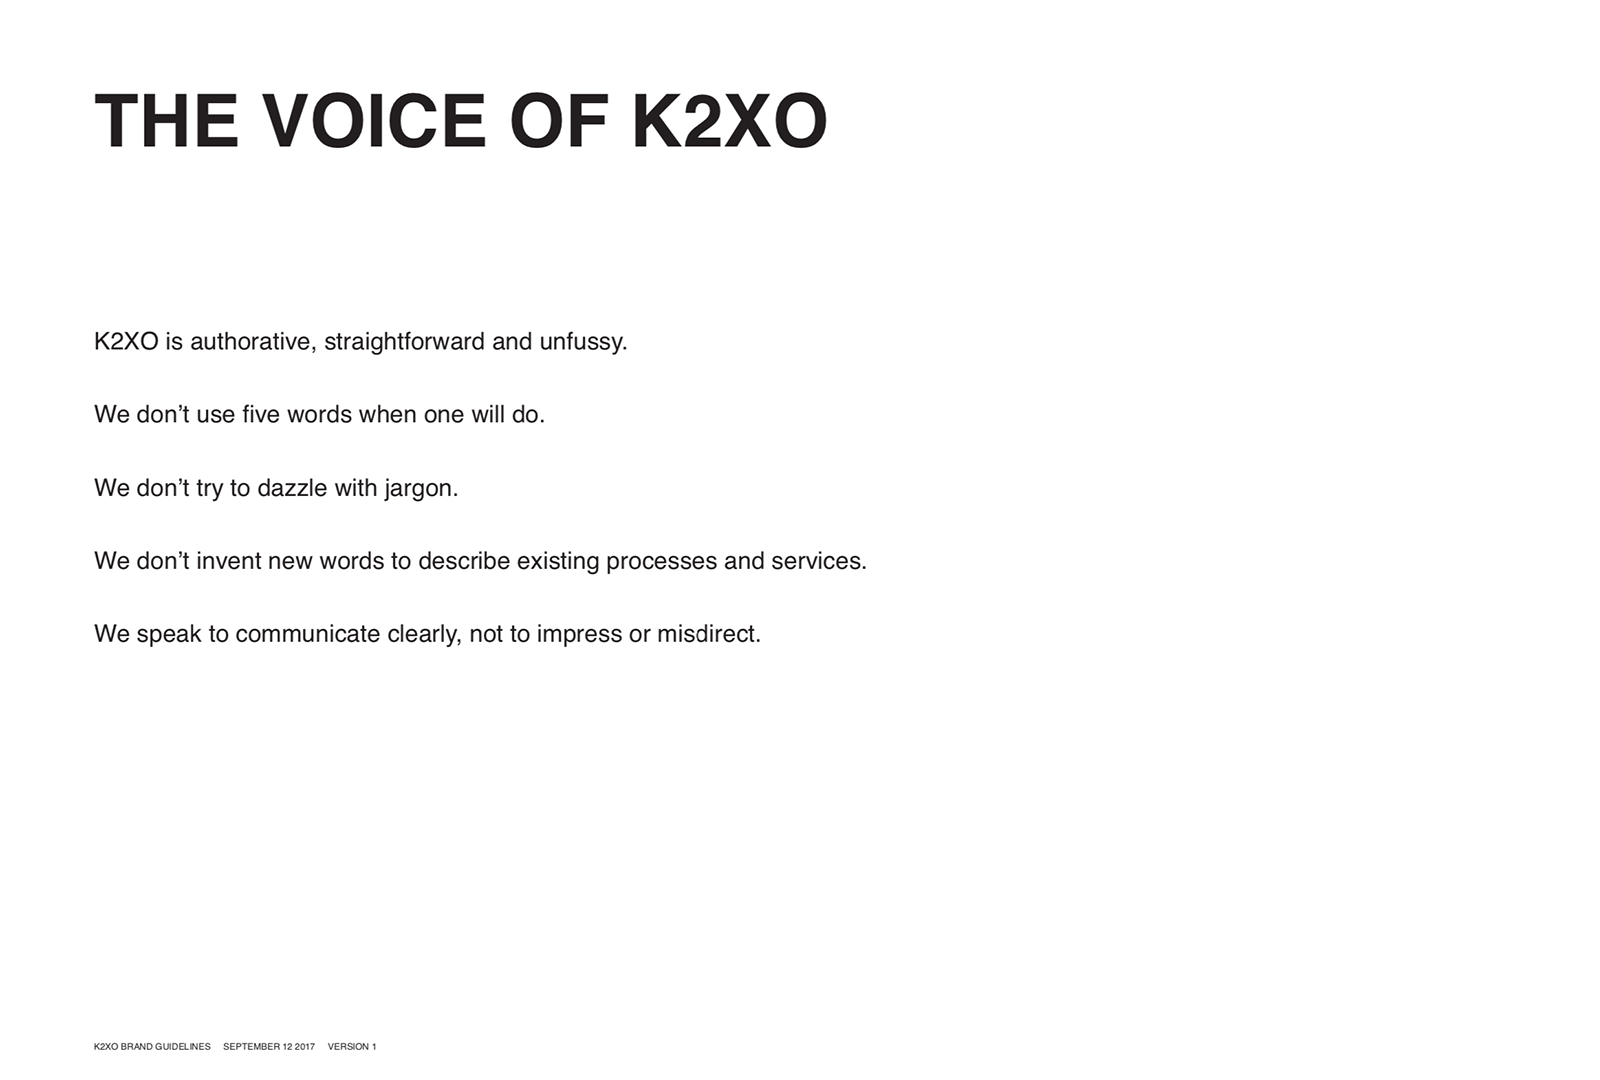 Brand guidelines - The Voice of K2XO